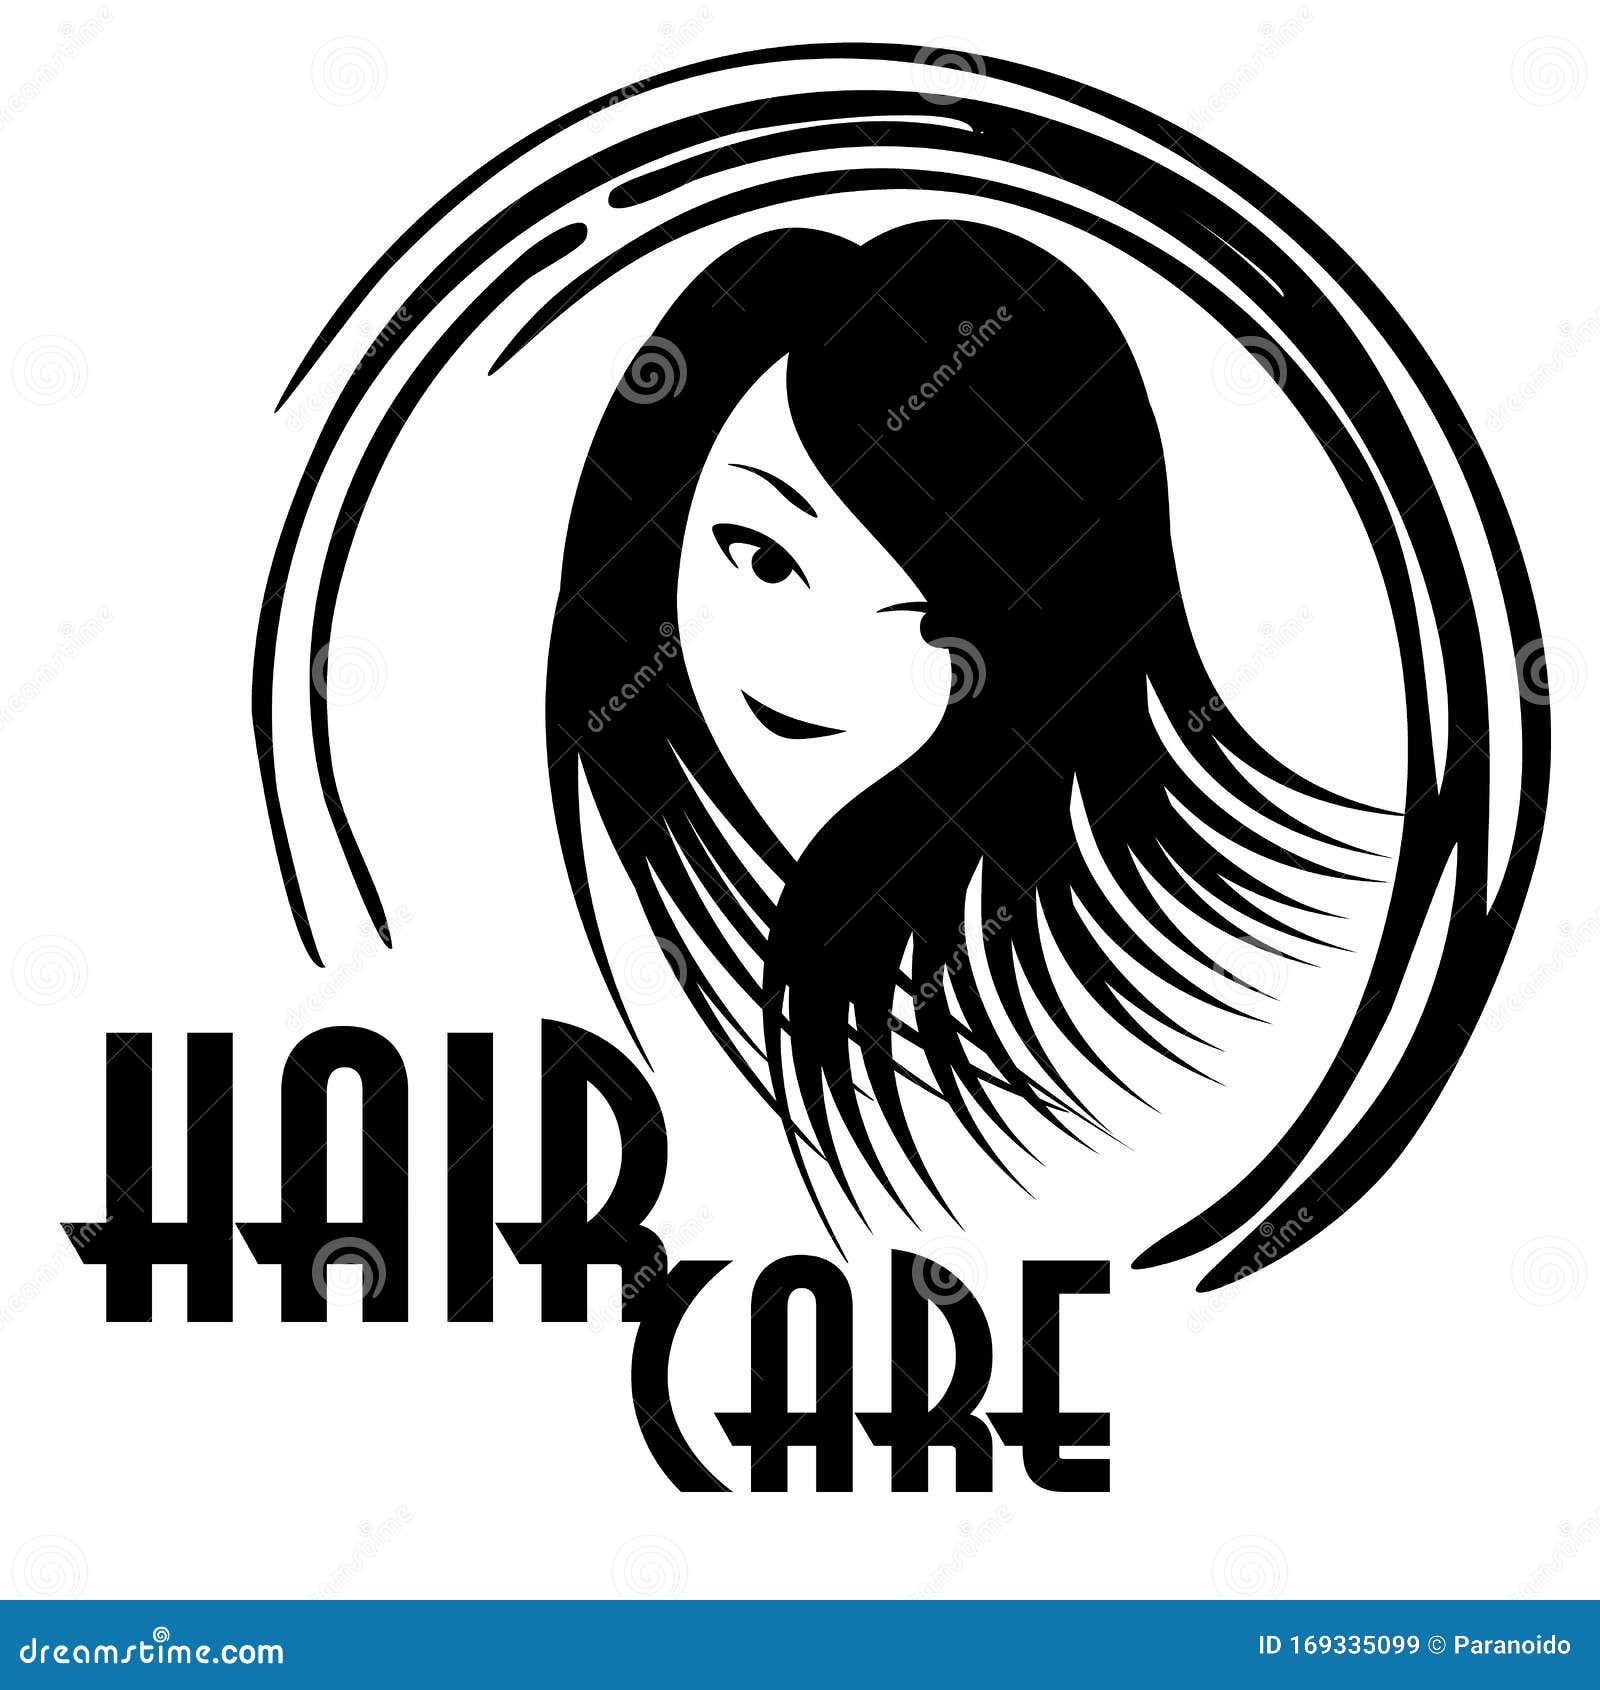 Collection 94+ Images this hair care brand has a woman’s face and hair as their logo Stunning